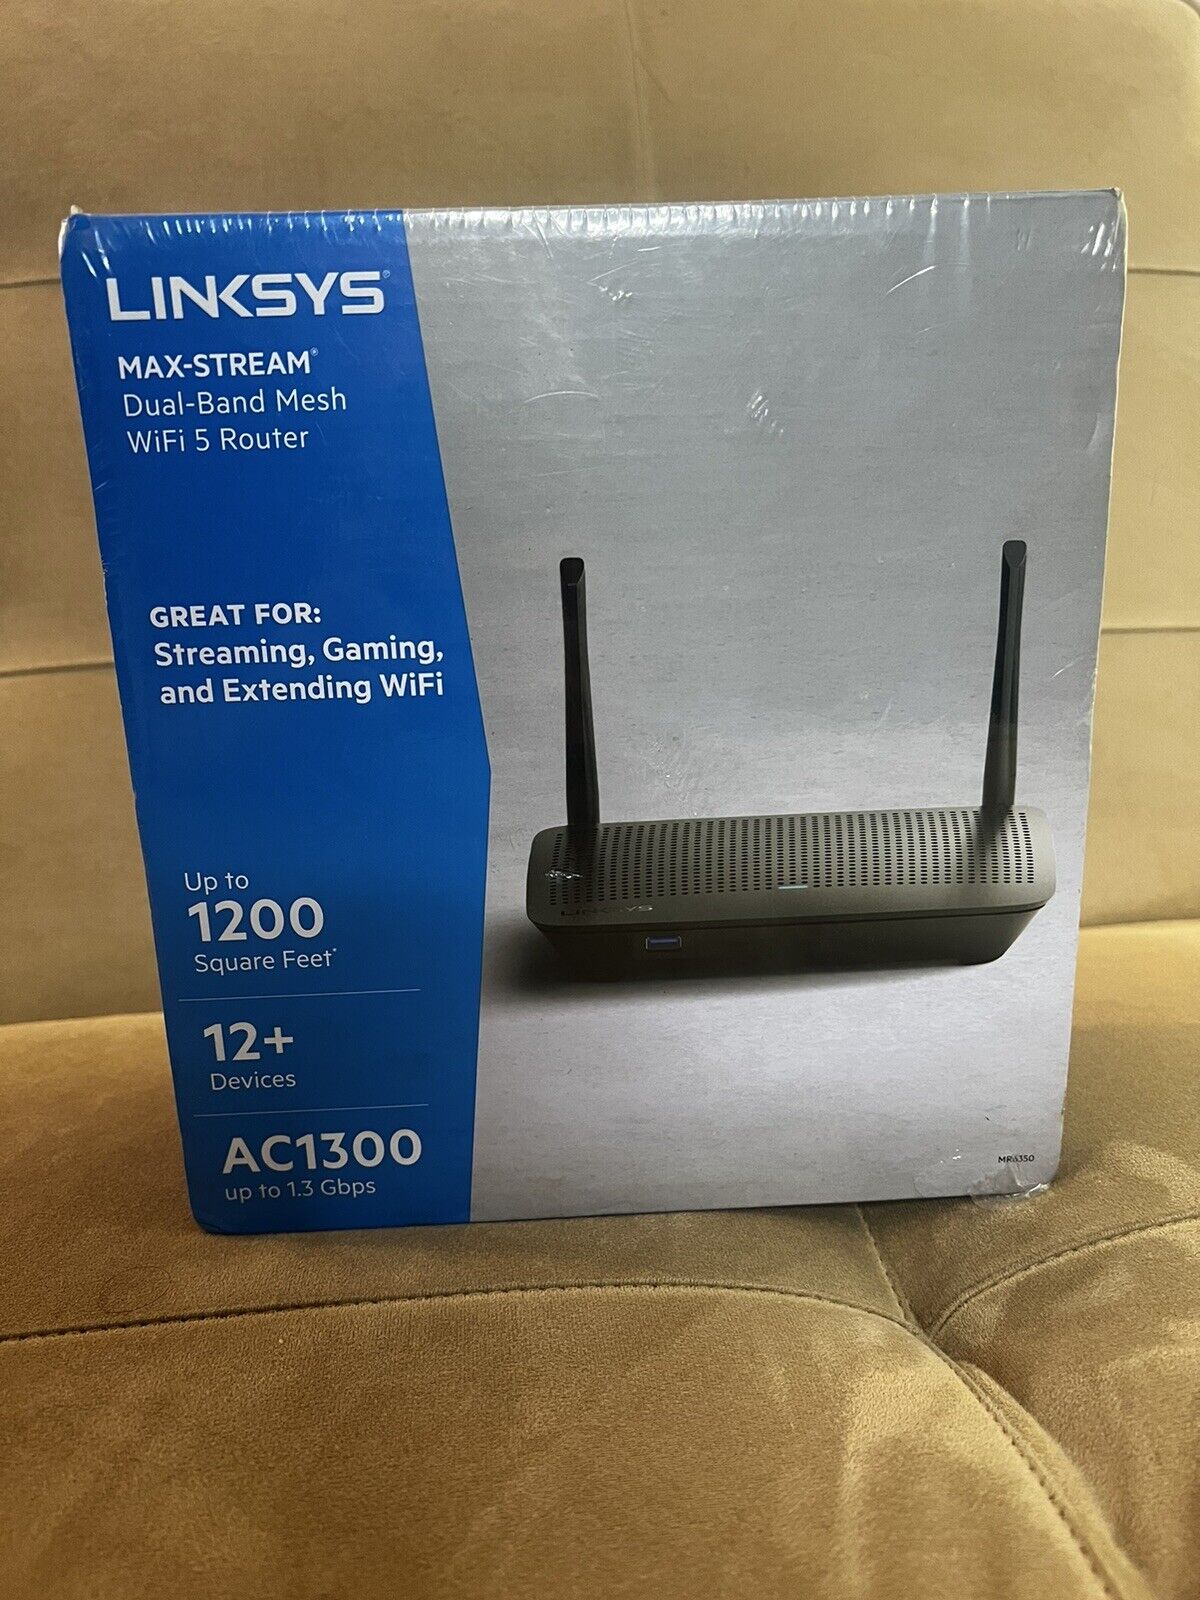 Linksys Max-Stream Dual-Band Mesh Wi-Fi Router NEW SEALED 1.3Gbps 12+ Devices